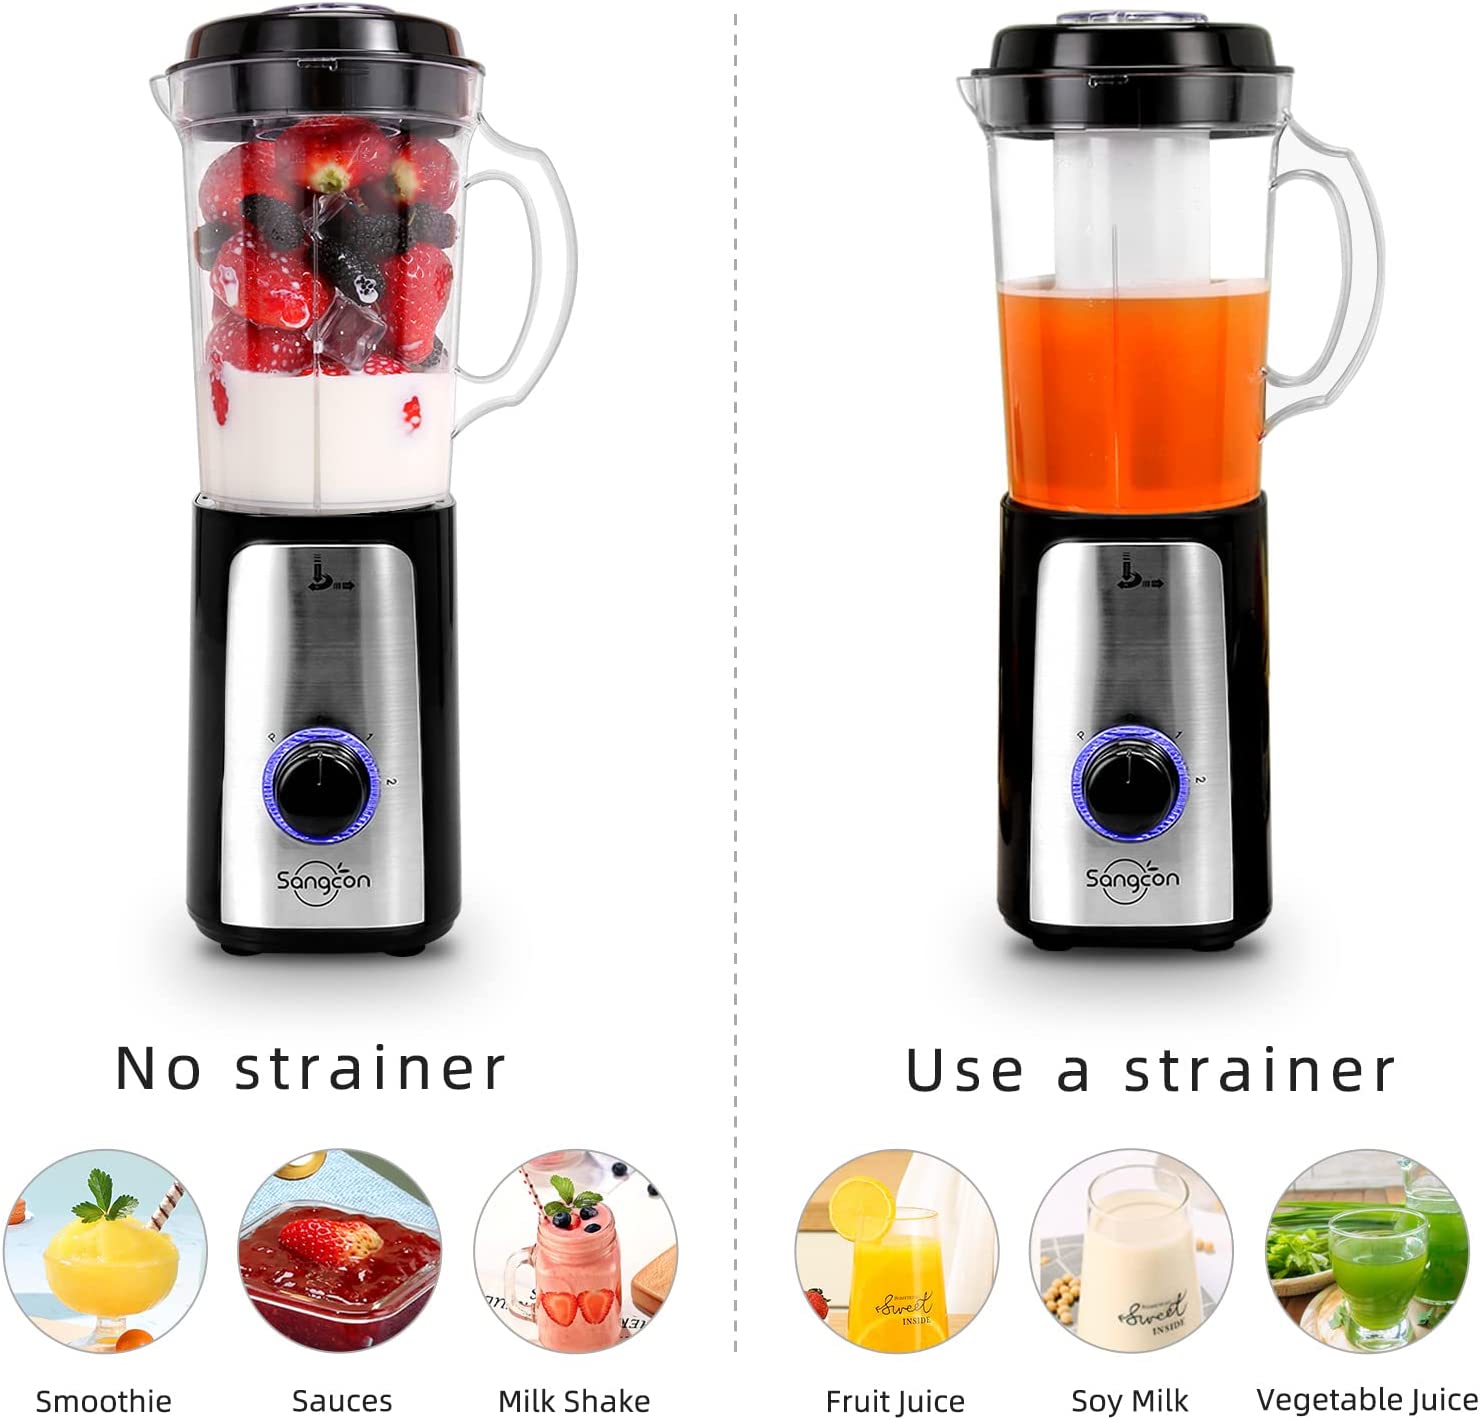 Sangcon 5 in 1 Kitchen Blender and Food Processor Combo, 350W High Speed  with Interchangeable Components for Versatile Cooking, Safety Design, 2